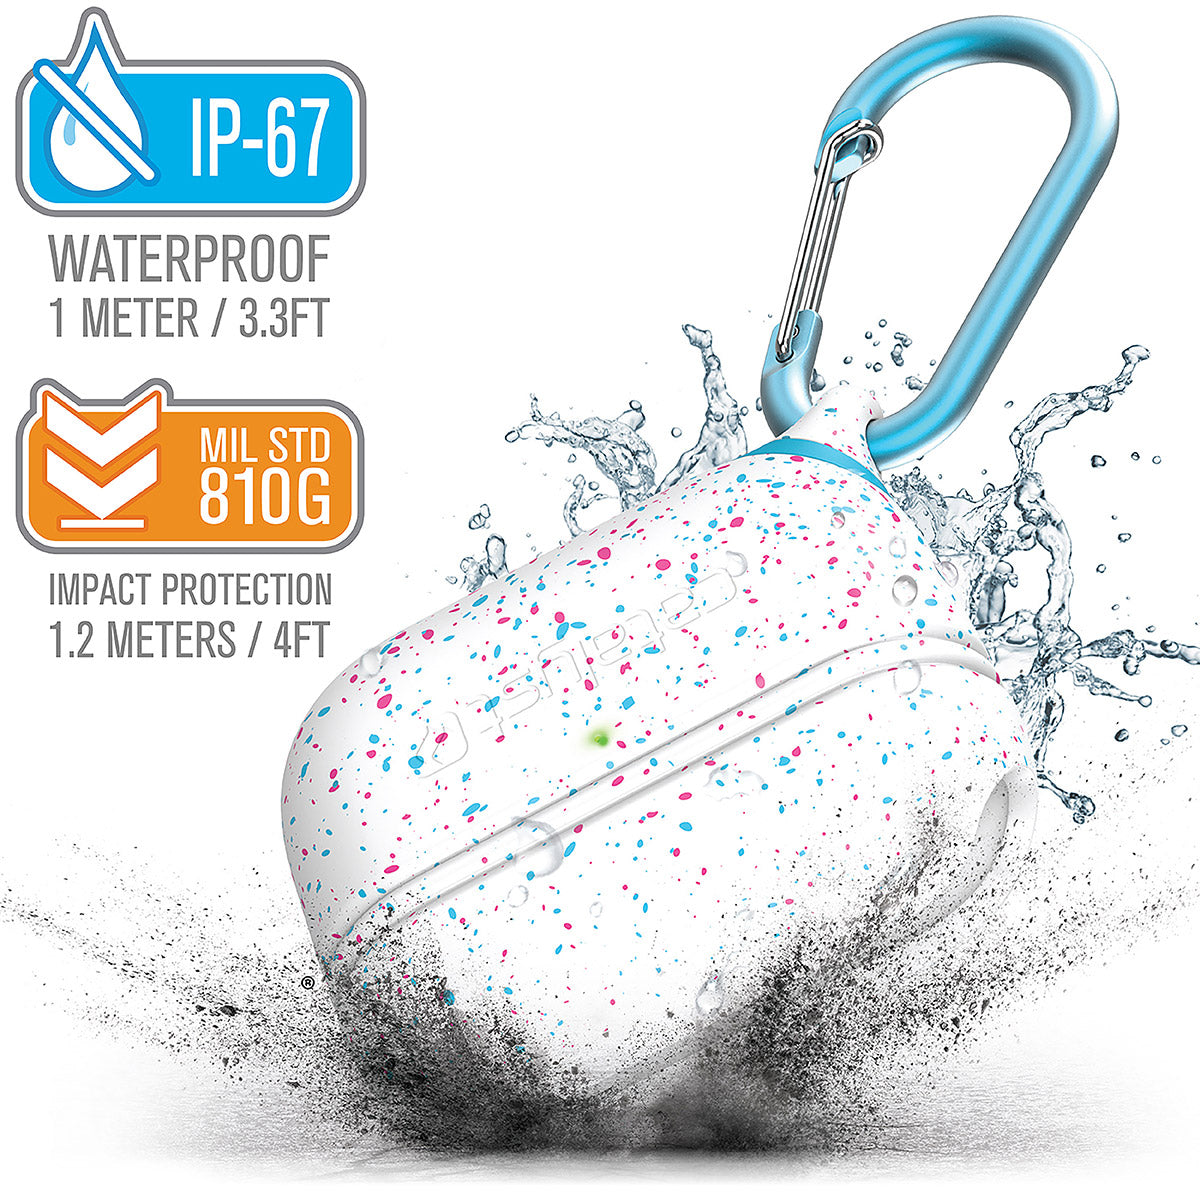 CATAPLAPDPROFUN | catalyst airpods pro gen 2 1 waterproof case carabiner special edition funfetti with cracked floor and splashes of water text reads ip-67 waterproof 1 meter 3.3ft mil std 810g impact protection 1.2 meters 4ft